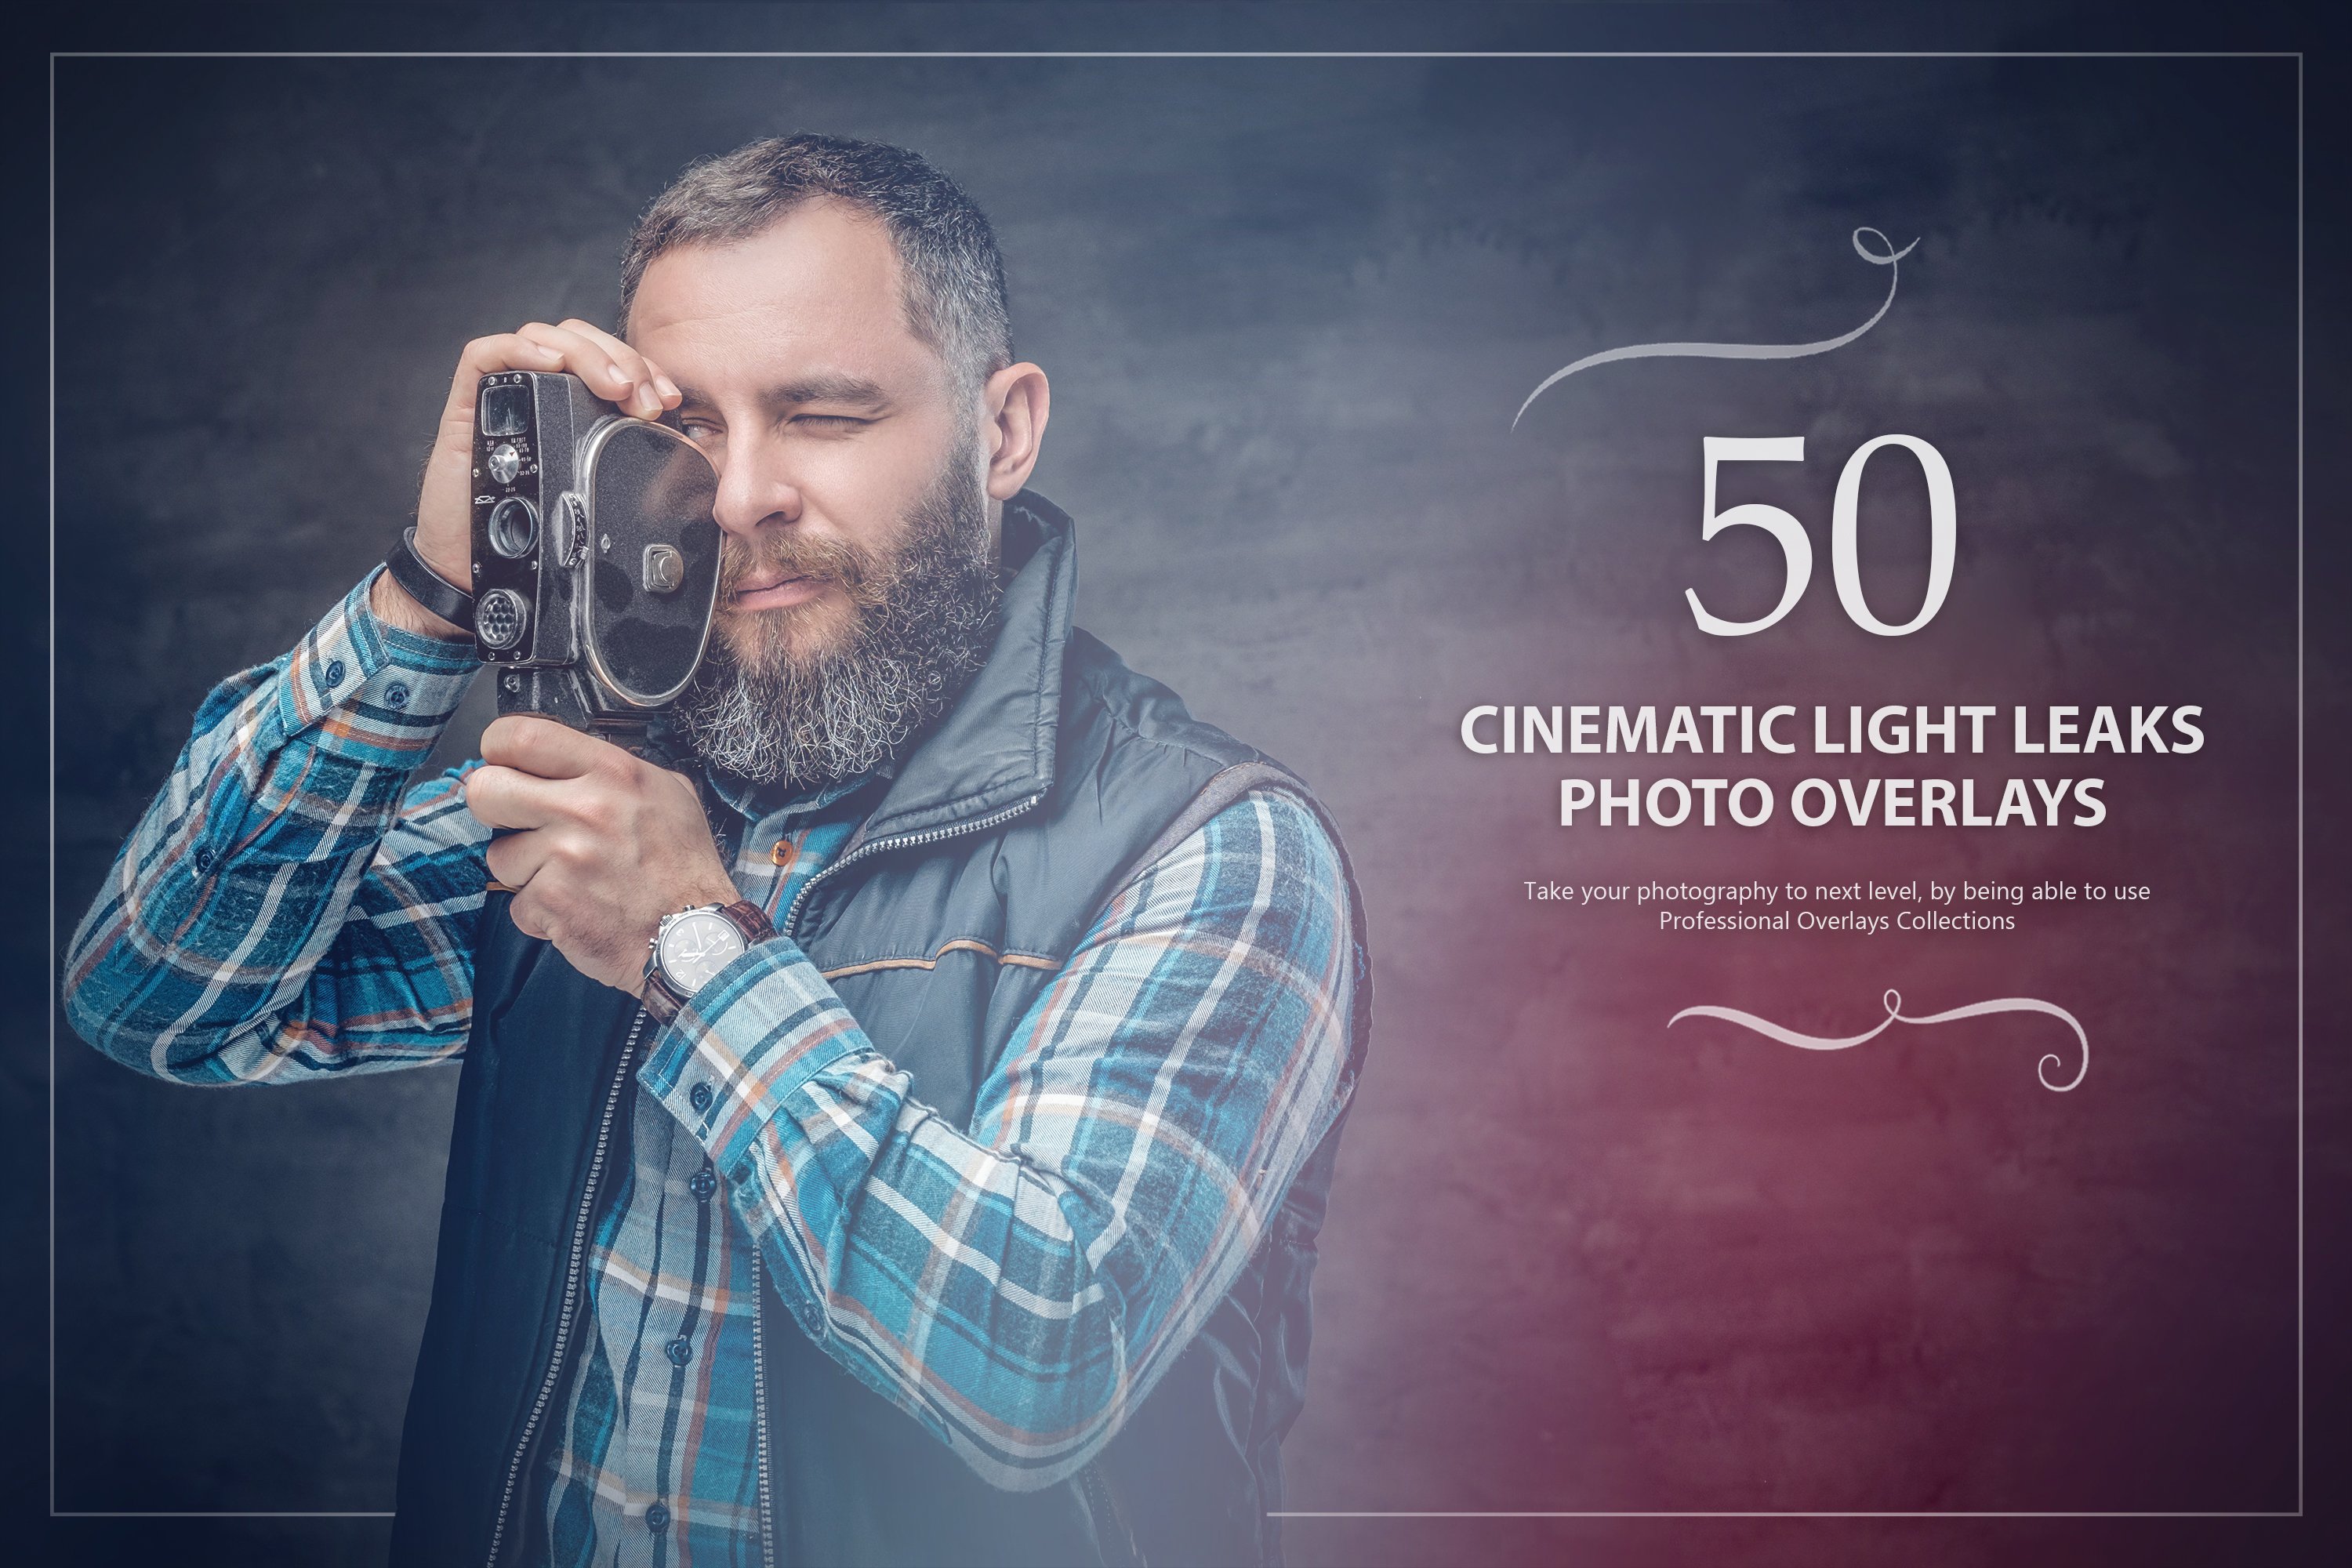 50 Cinematic Light Leaks Overlayscover image.